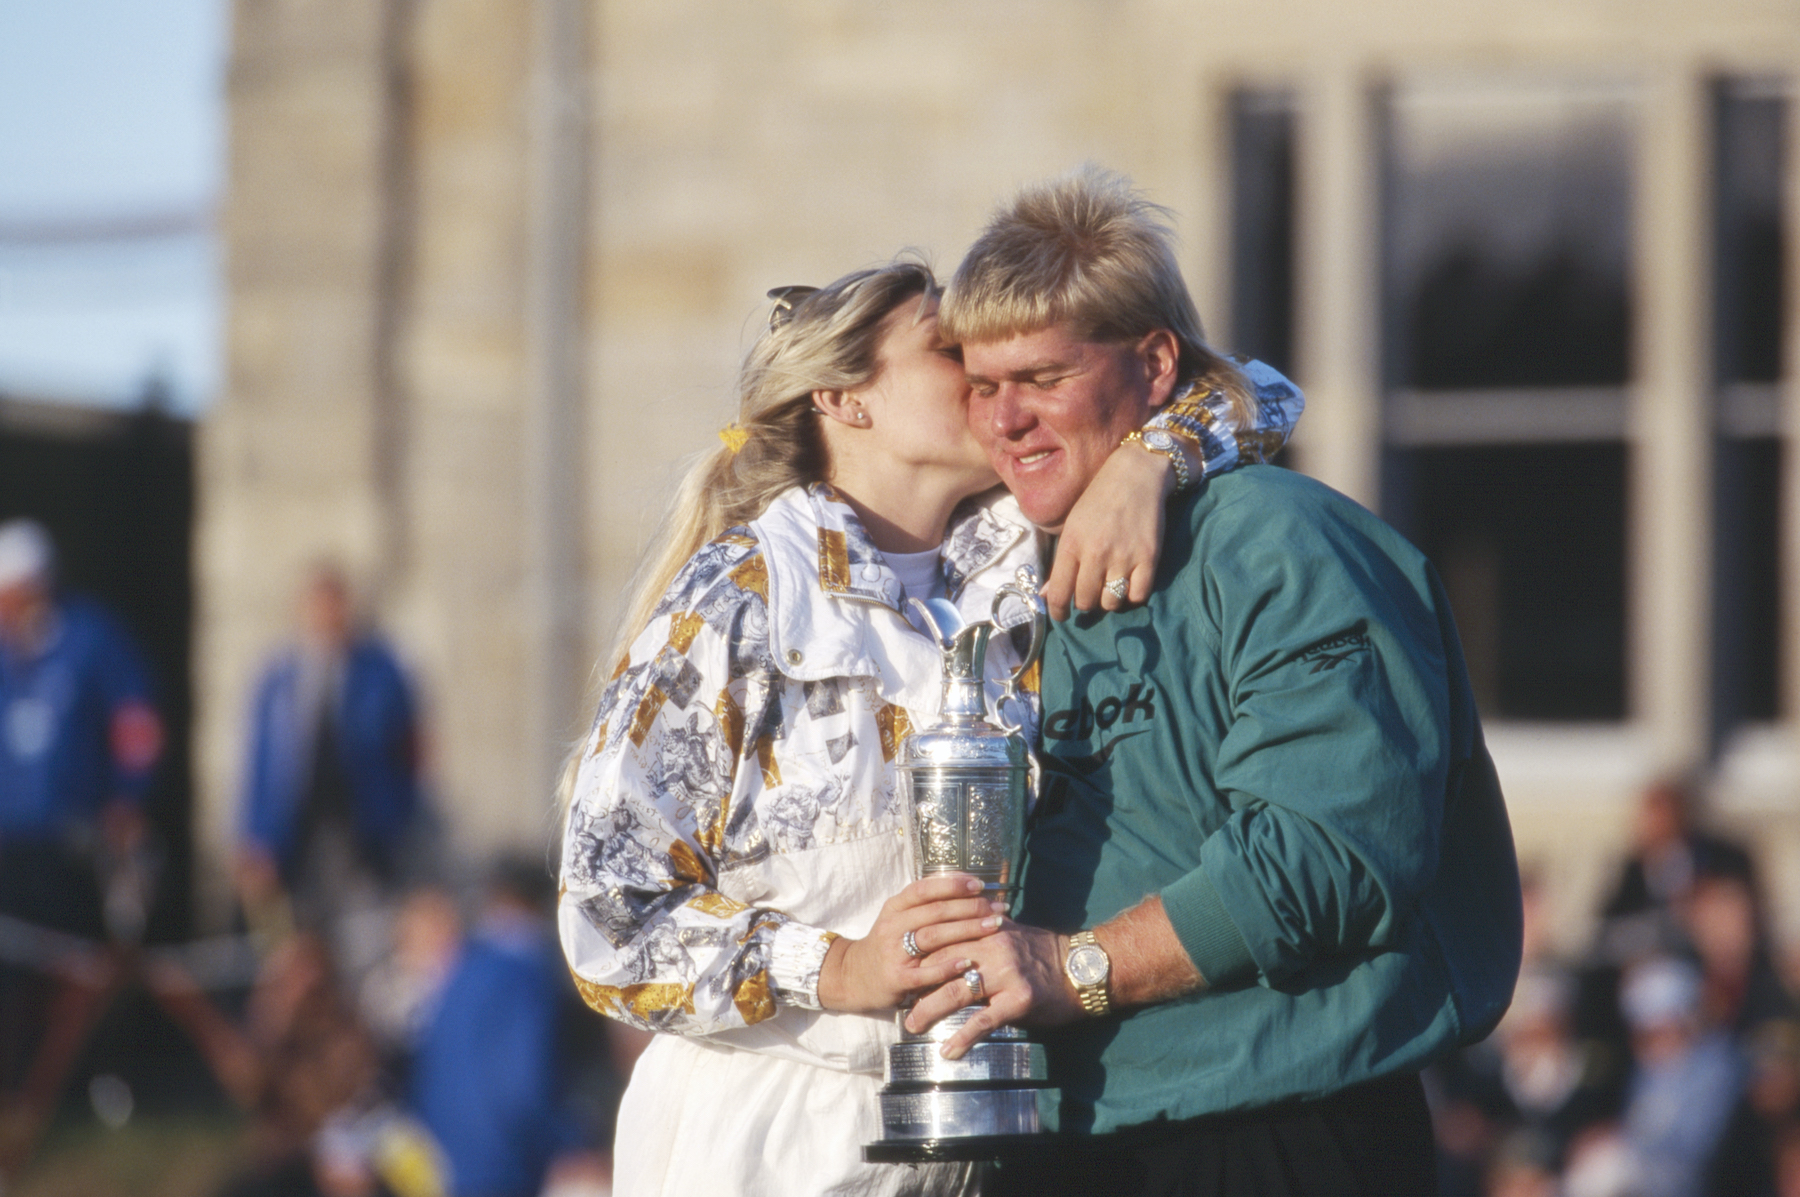 John Daly’s 4 Divorces Forced Him to Take a Huge Financial Hit